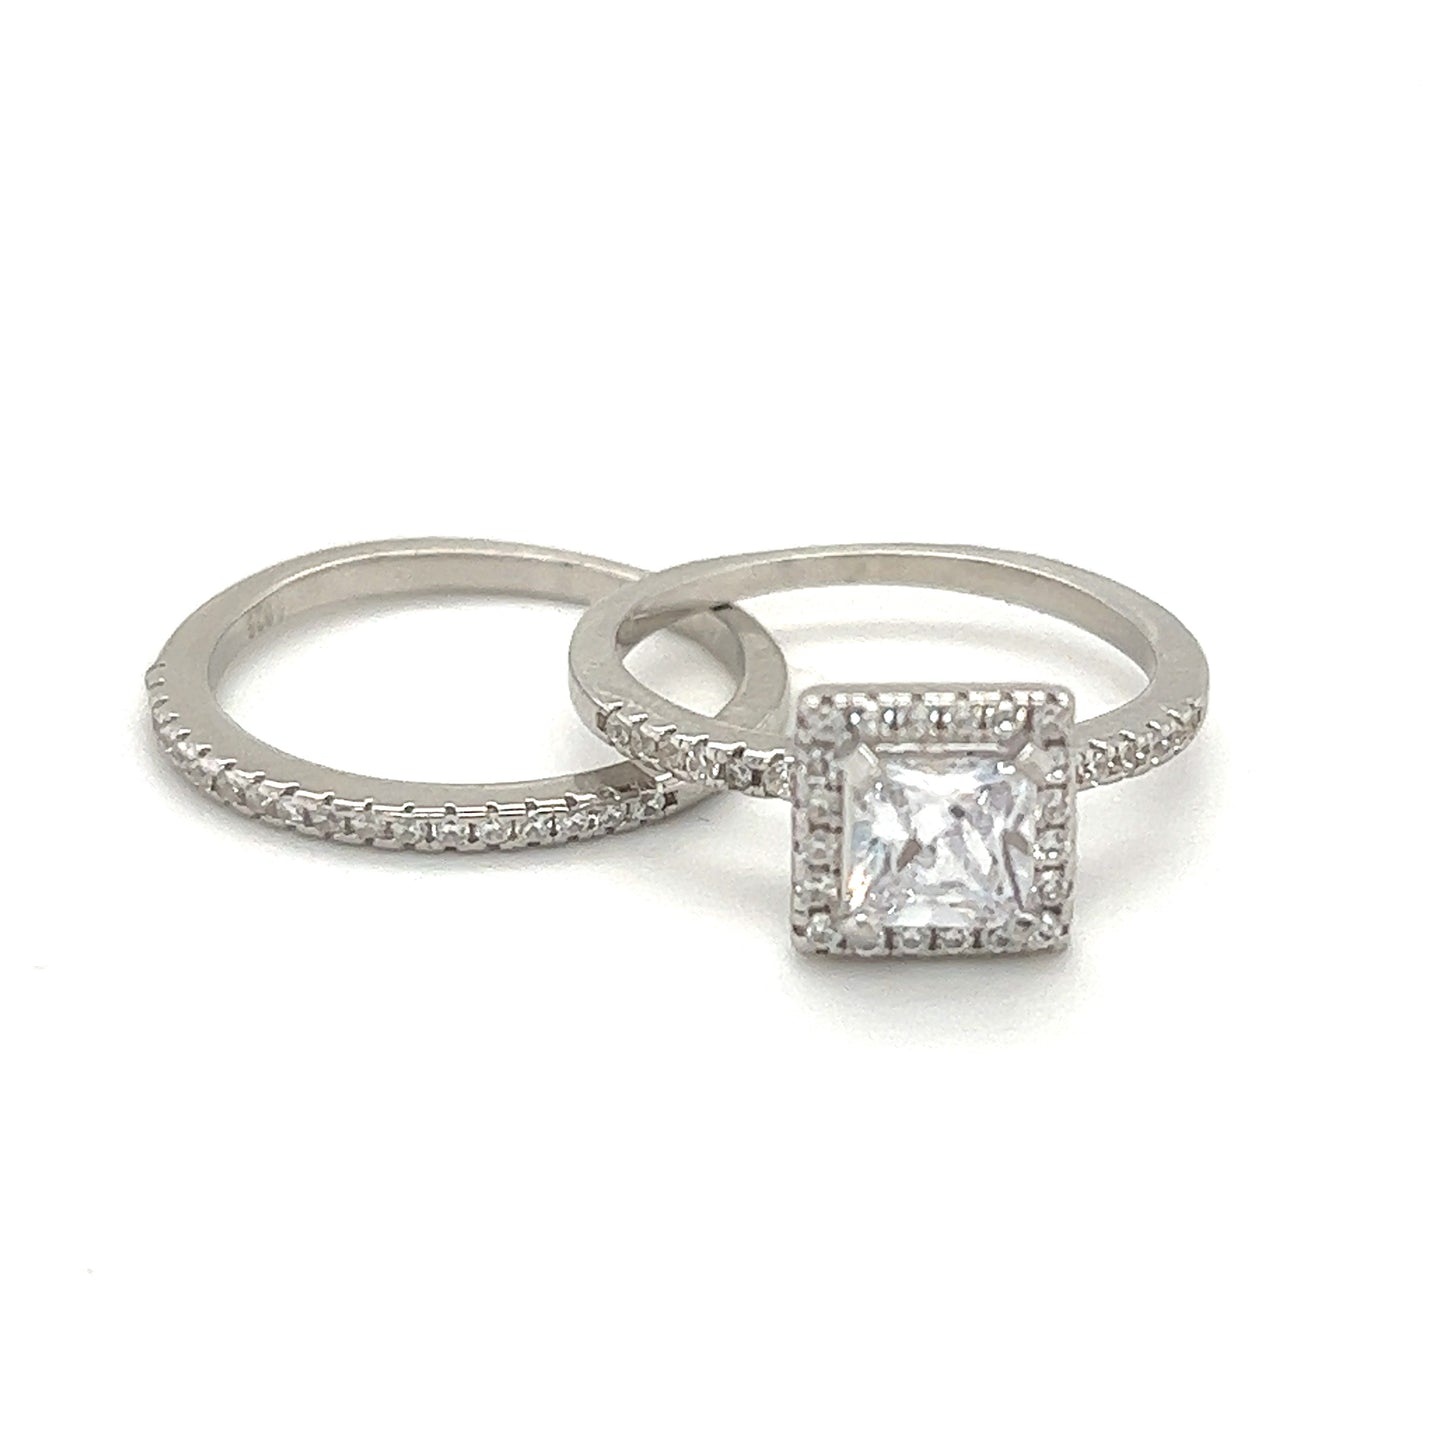 An elegant Princess Cut Cubic Zirconia Engagement Ring set with princess cut diamonds in white gold.